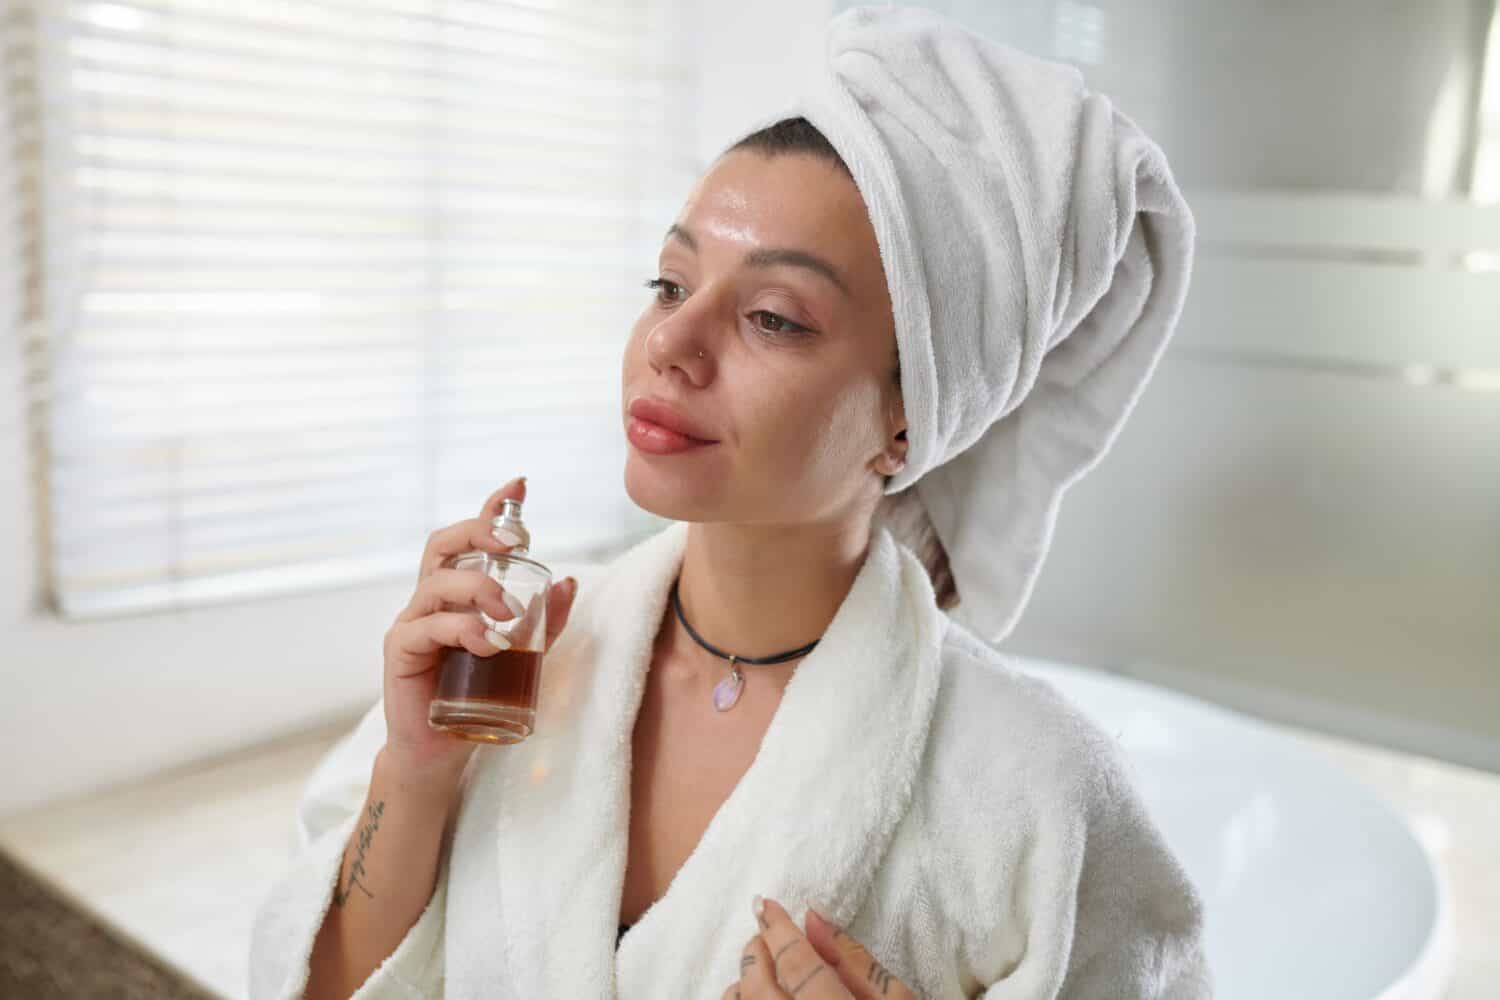 Young pleased woman in bathrobe spraying new fragrance from bottle on her skin and enjoying smell of perfume while standing in bathroom